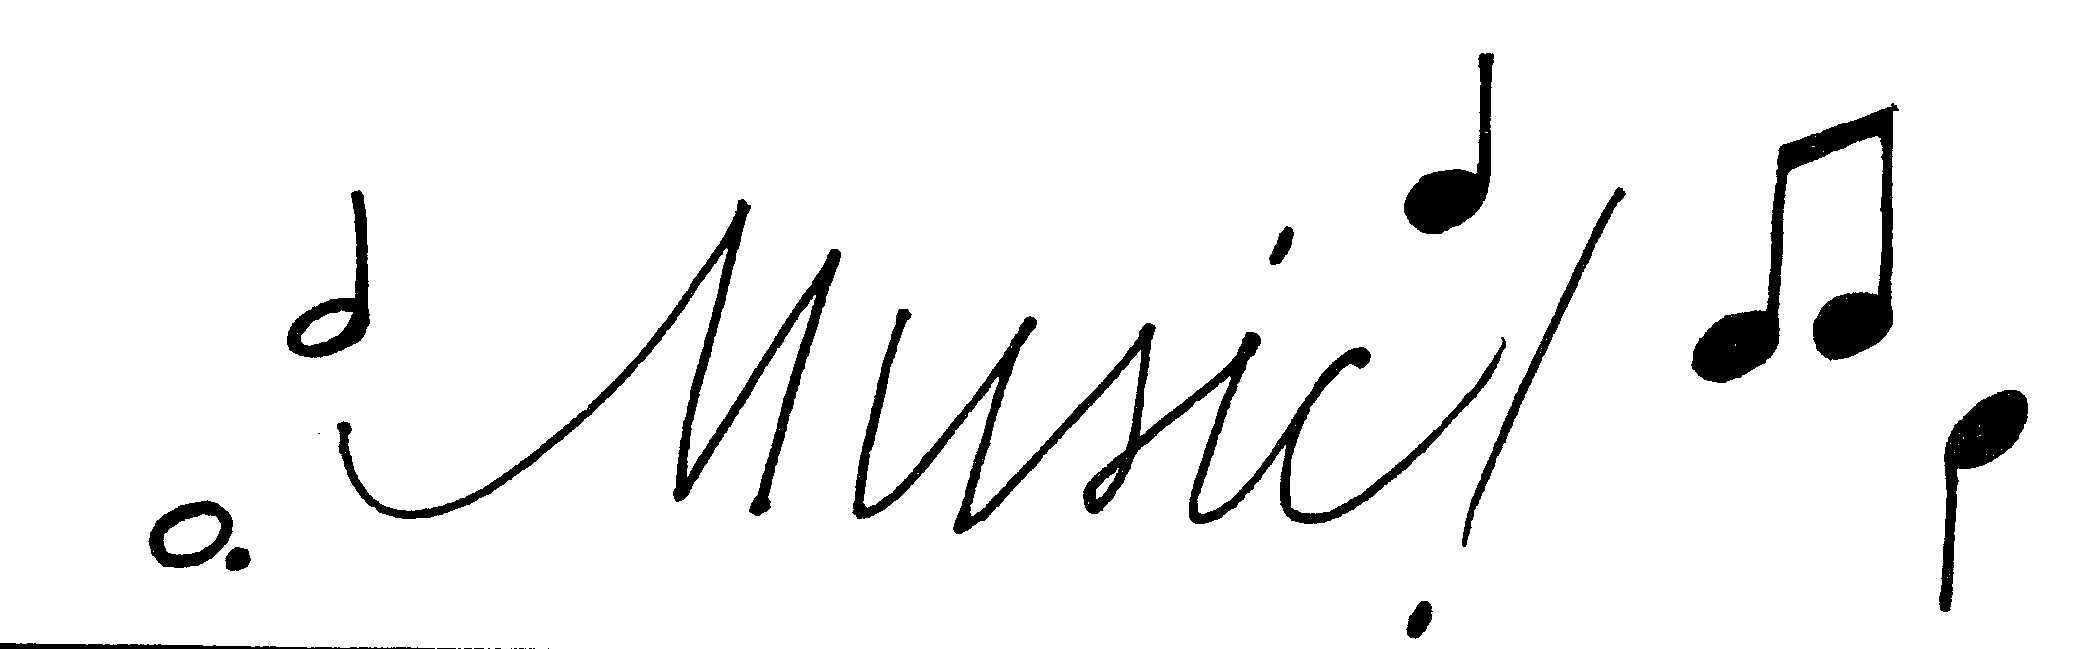 music clipart for word - photo #33